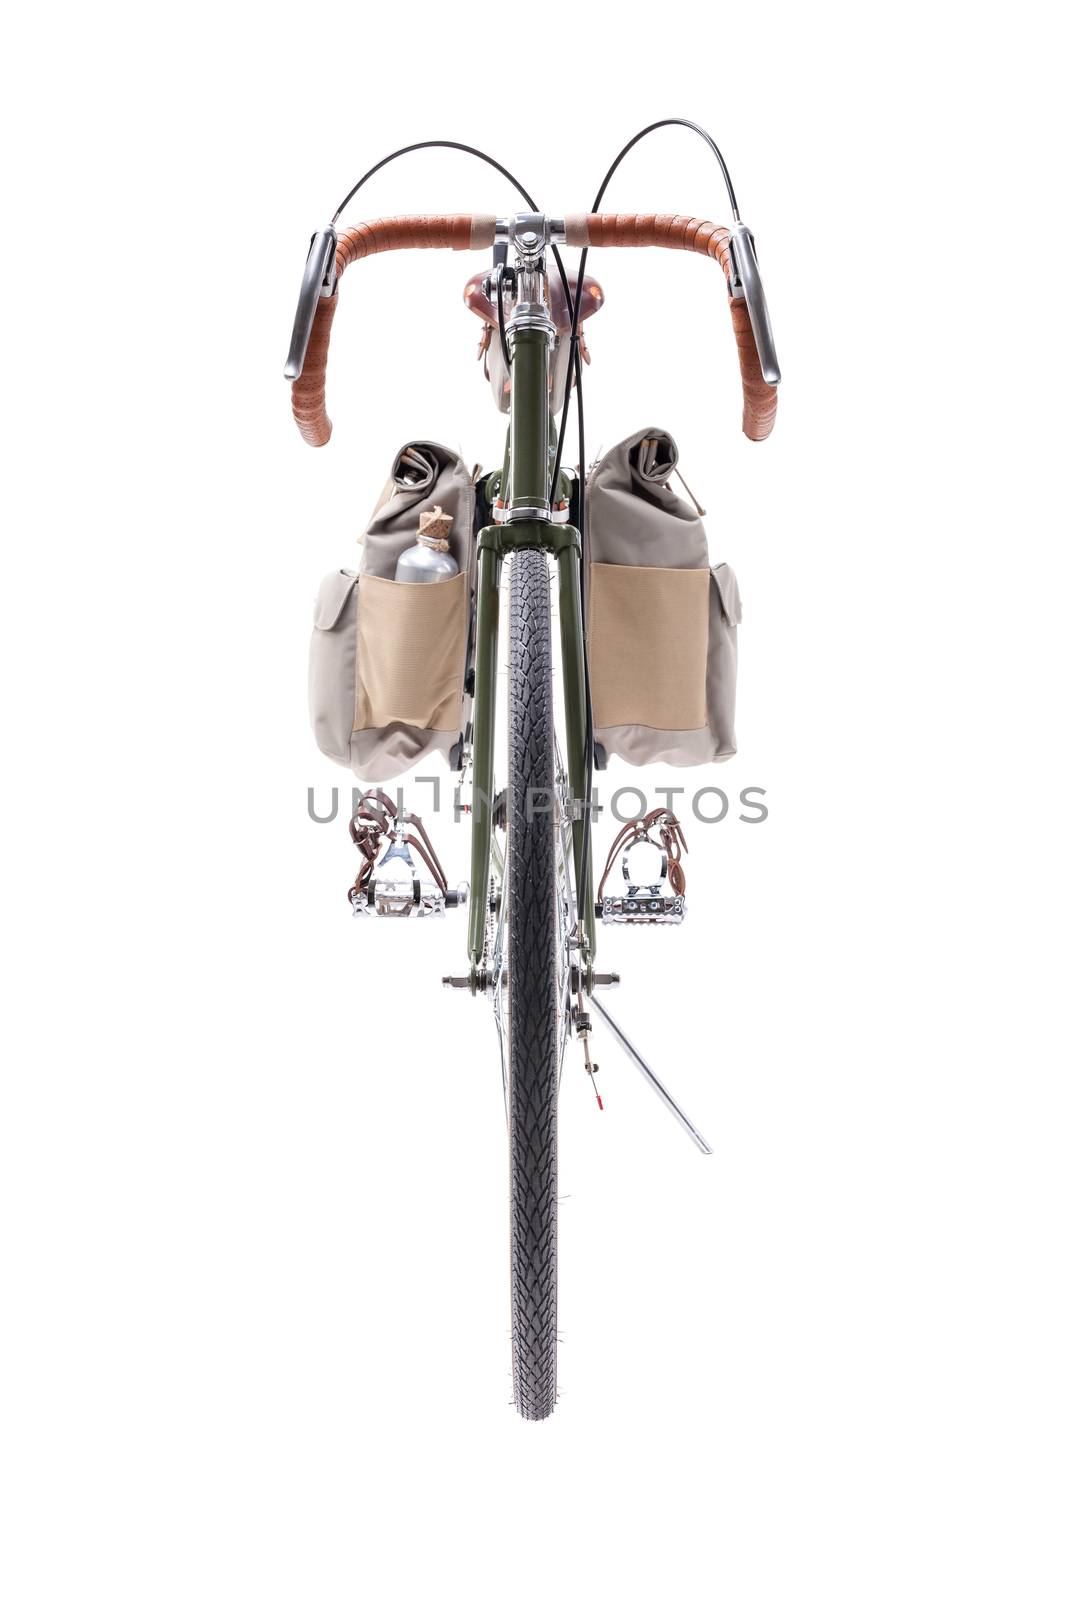 Vintage green road bicycle isolated on white. Front view.